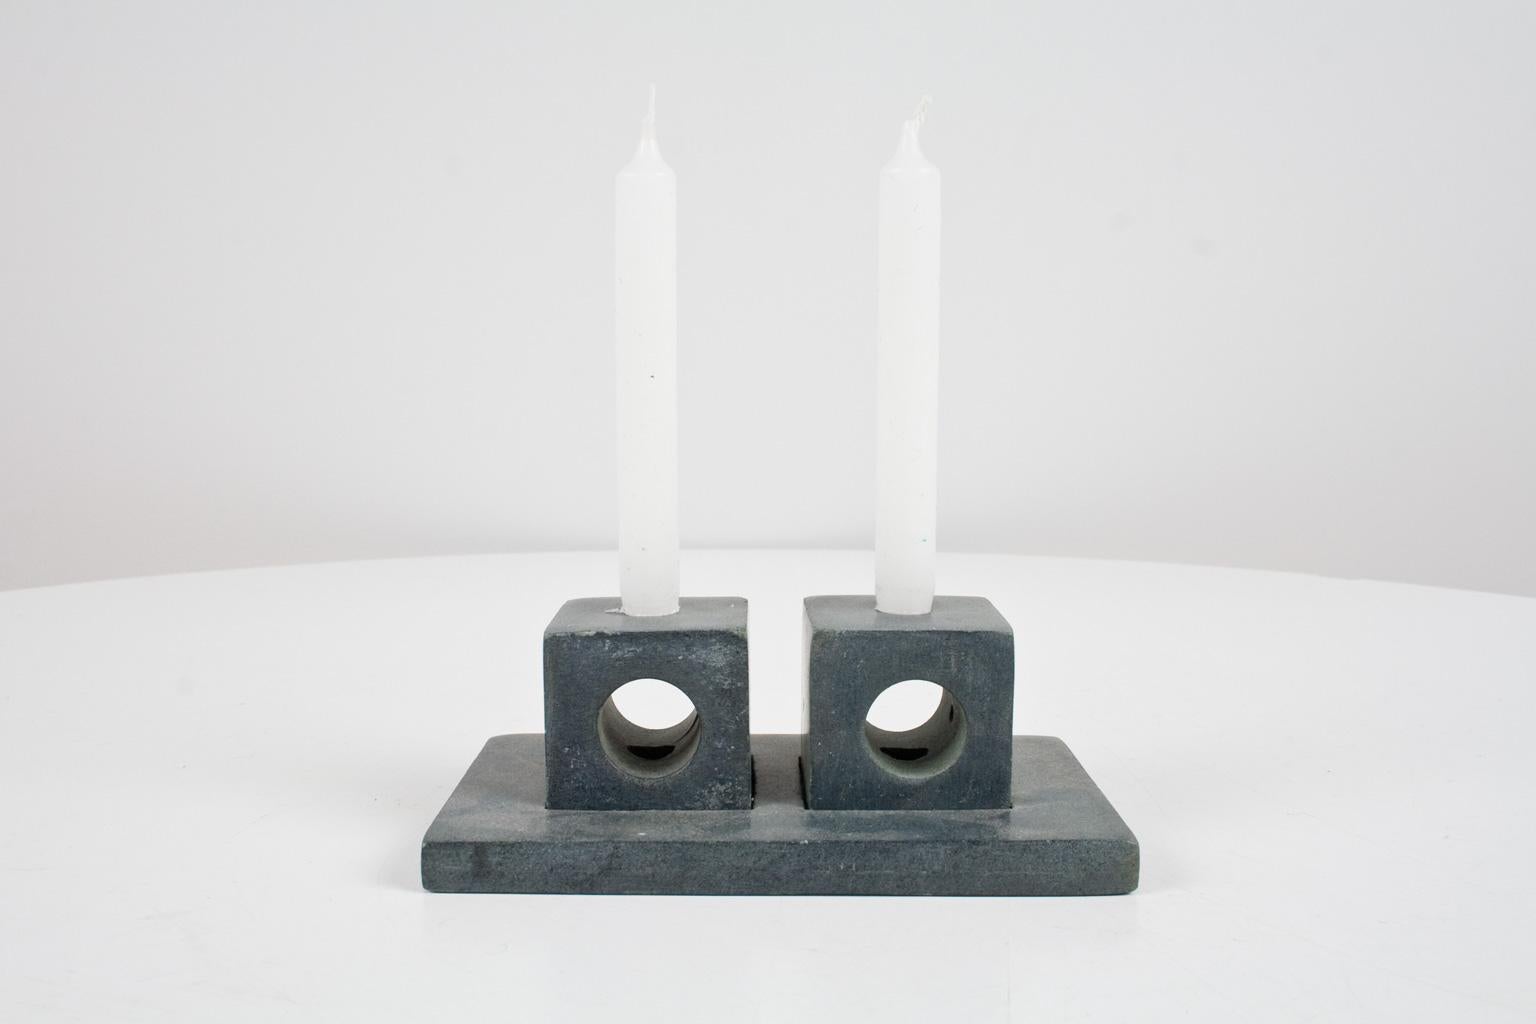 Handmade modernist bluestone candleholder, polished. Originated from Belgium, circa 1970s, designer unknown. The two cubic candleholders have three sized openings, for round candles of 19mm and of 9mm ( 0.74 and 0.35 inch) and a small size opening